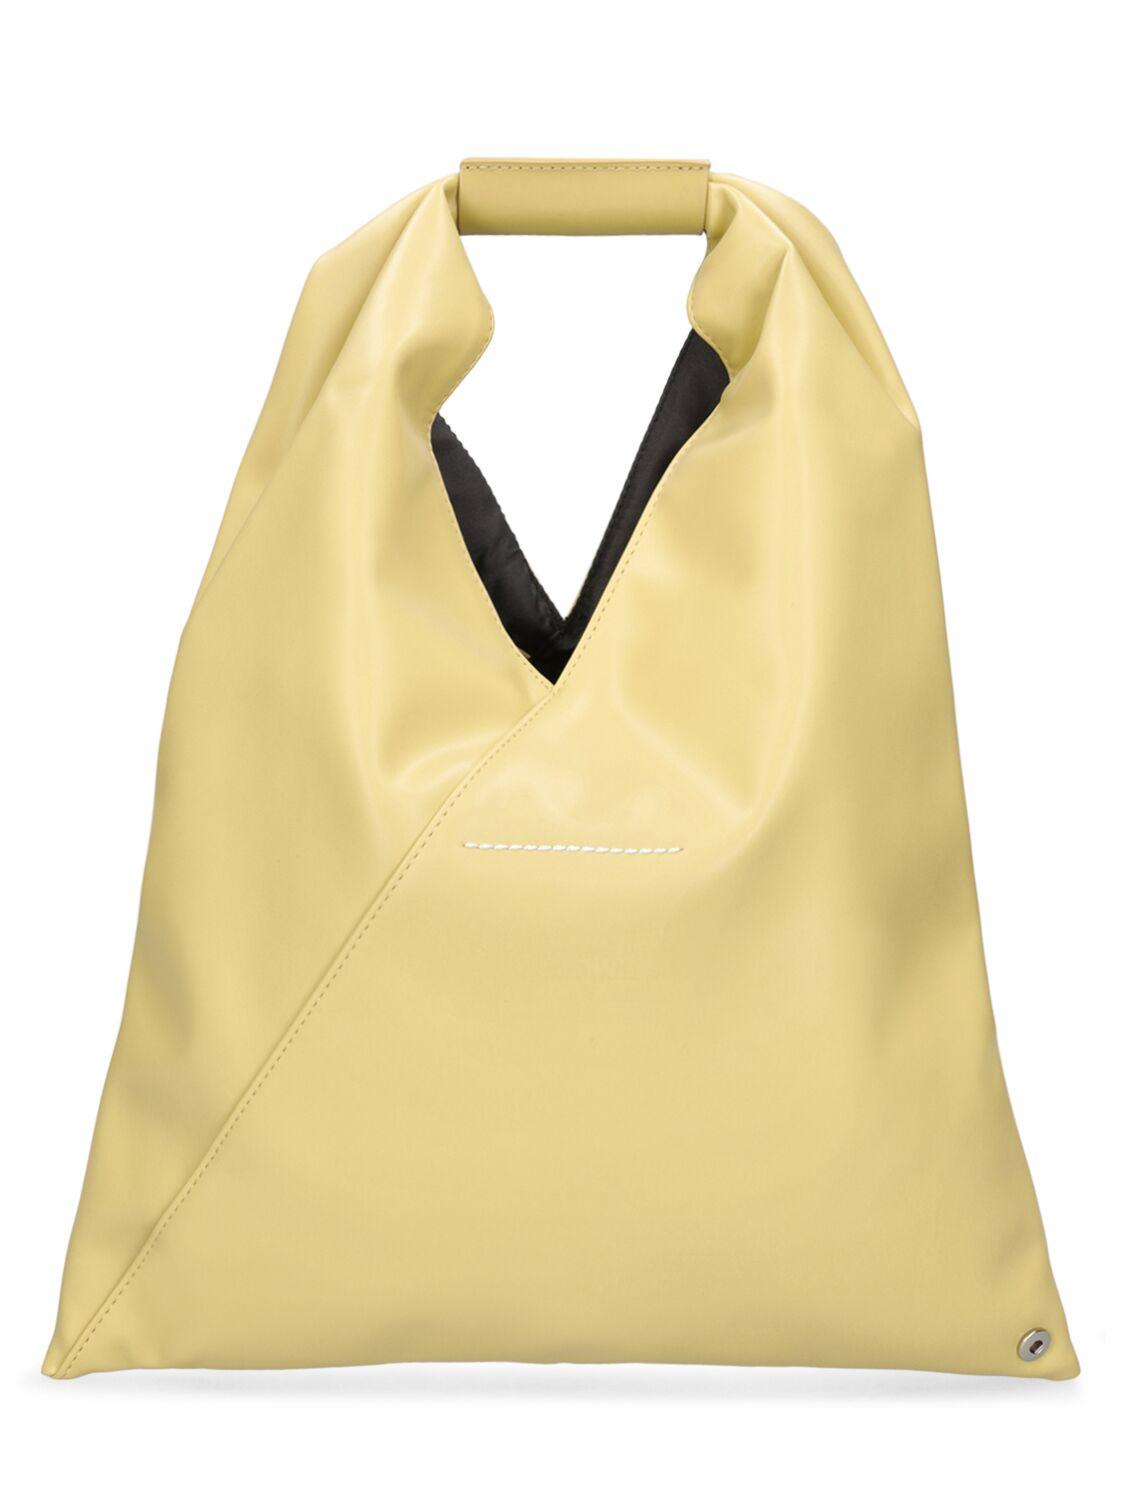 MM6 by Maison Martin Margiela Small Japanese Faux Leather Bag in